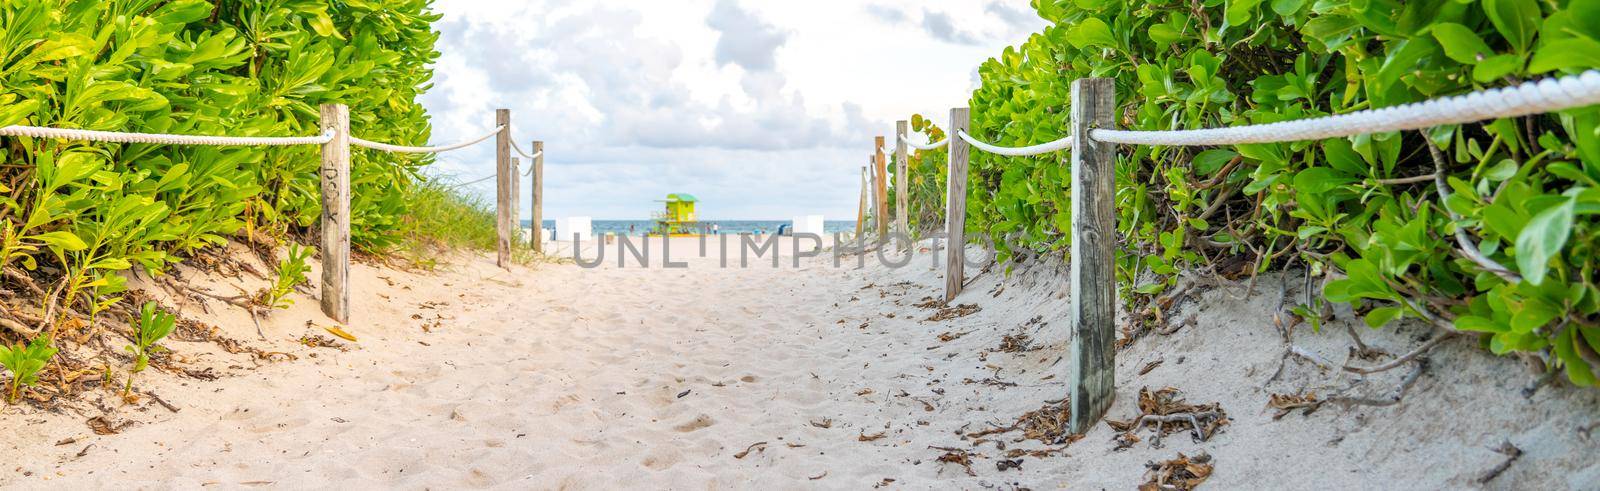 Pathway to the beach in Miami Florida with an ocean background